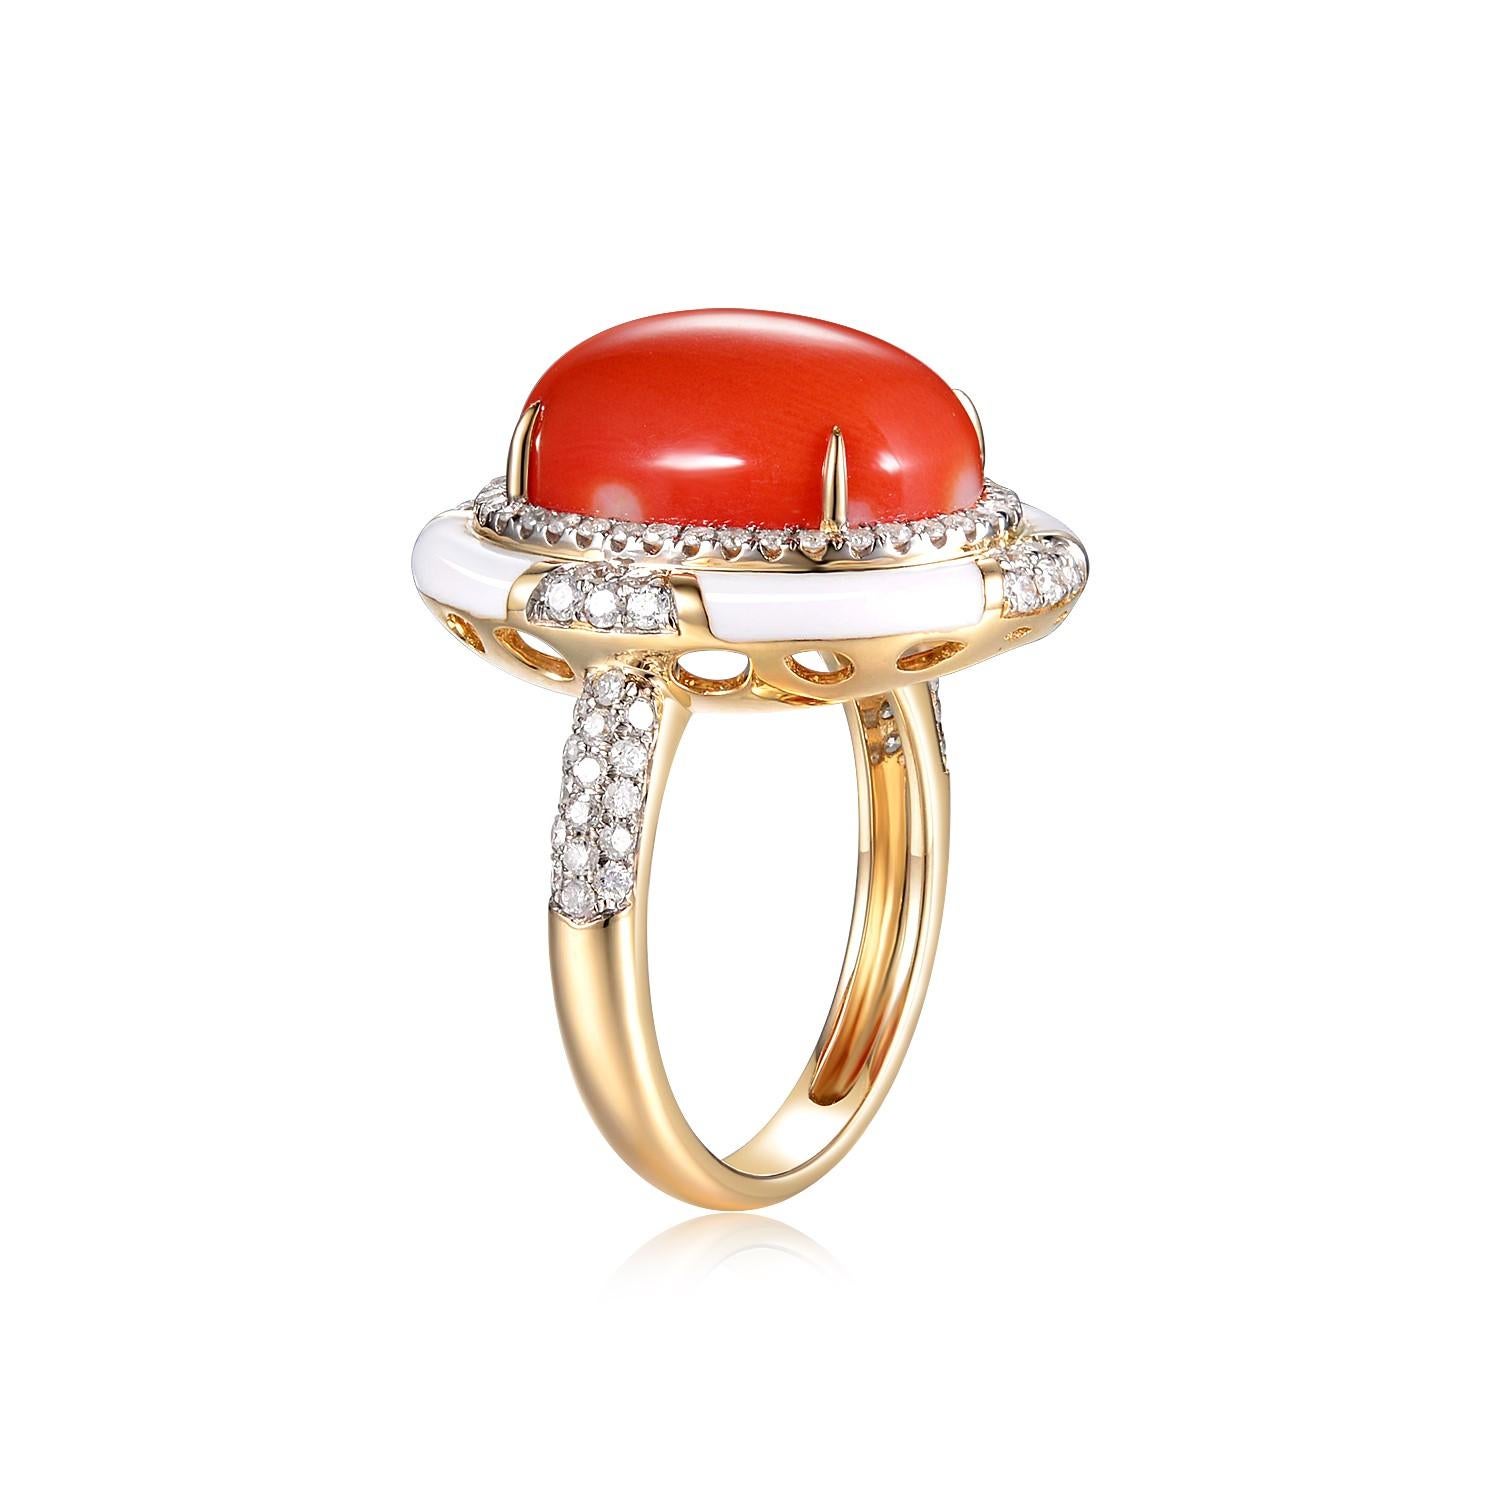 The 7.25ct Coral Diamond Enamel Ring, elegantly crafted in 14 Karat Yellow Gold, is a breathtaking ode to nature's splendor and the refined craftsmanship of human artistry. The centerpiece, a luscious 7.25 carat coral, demands attention with its